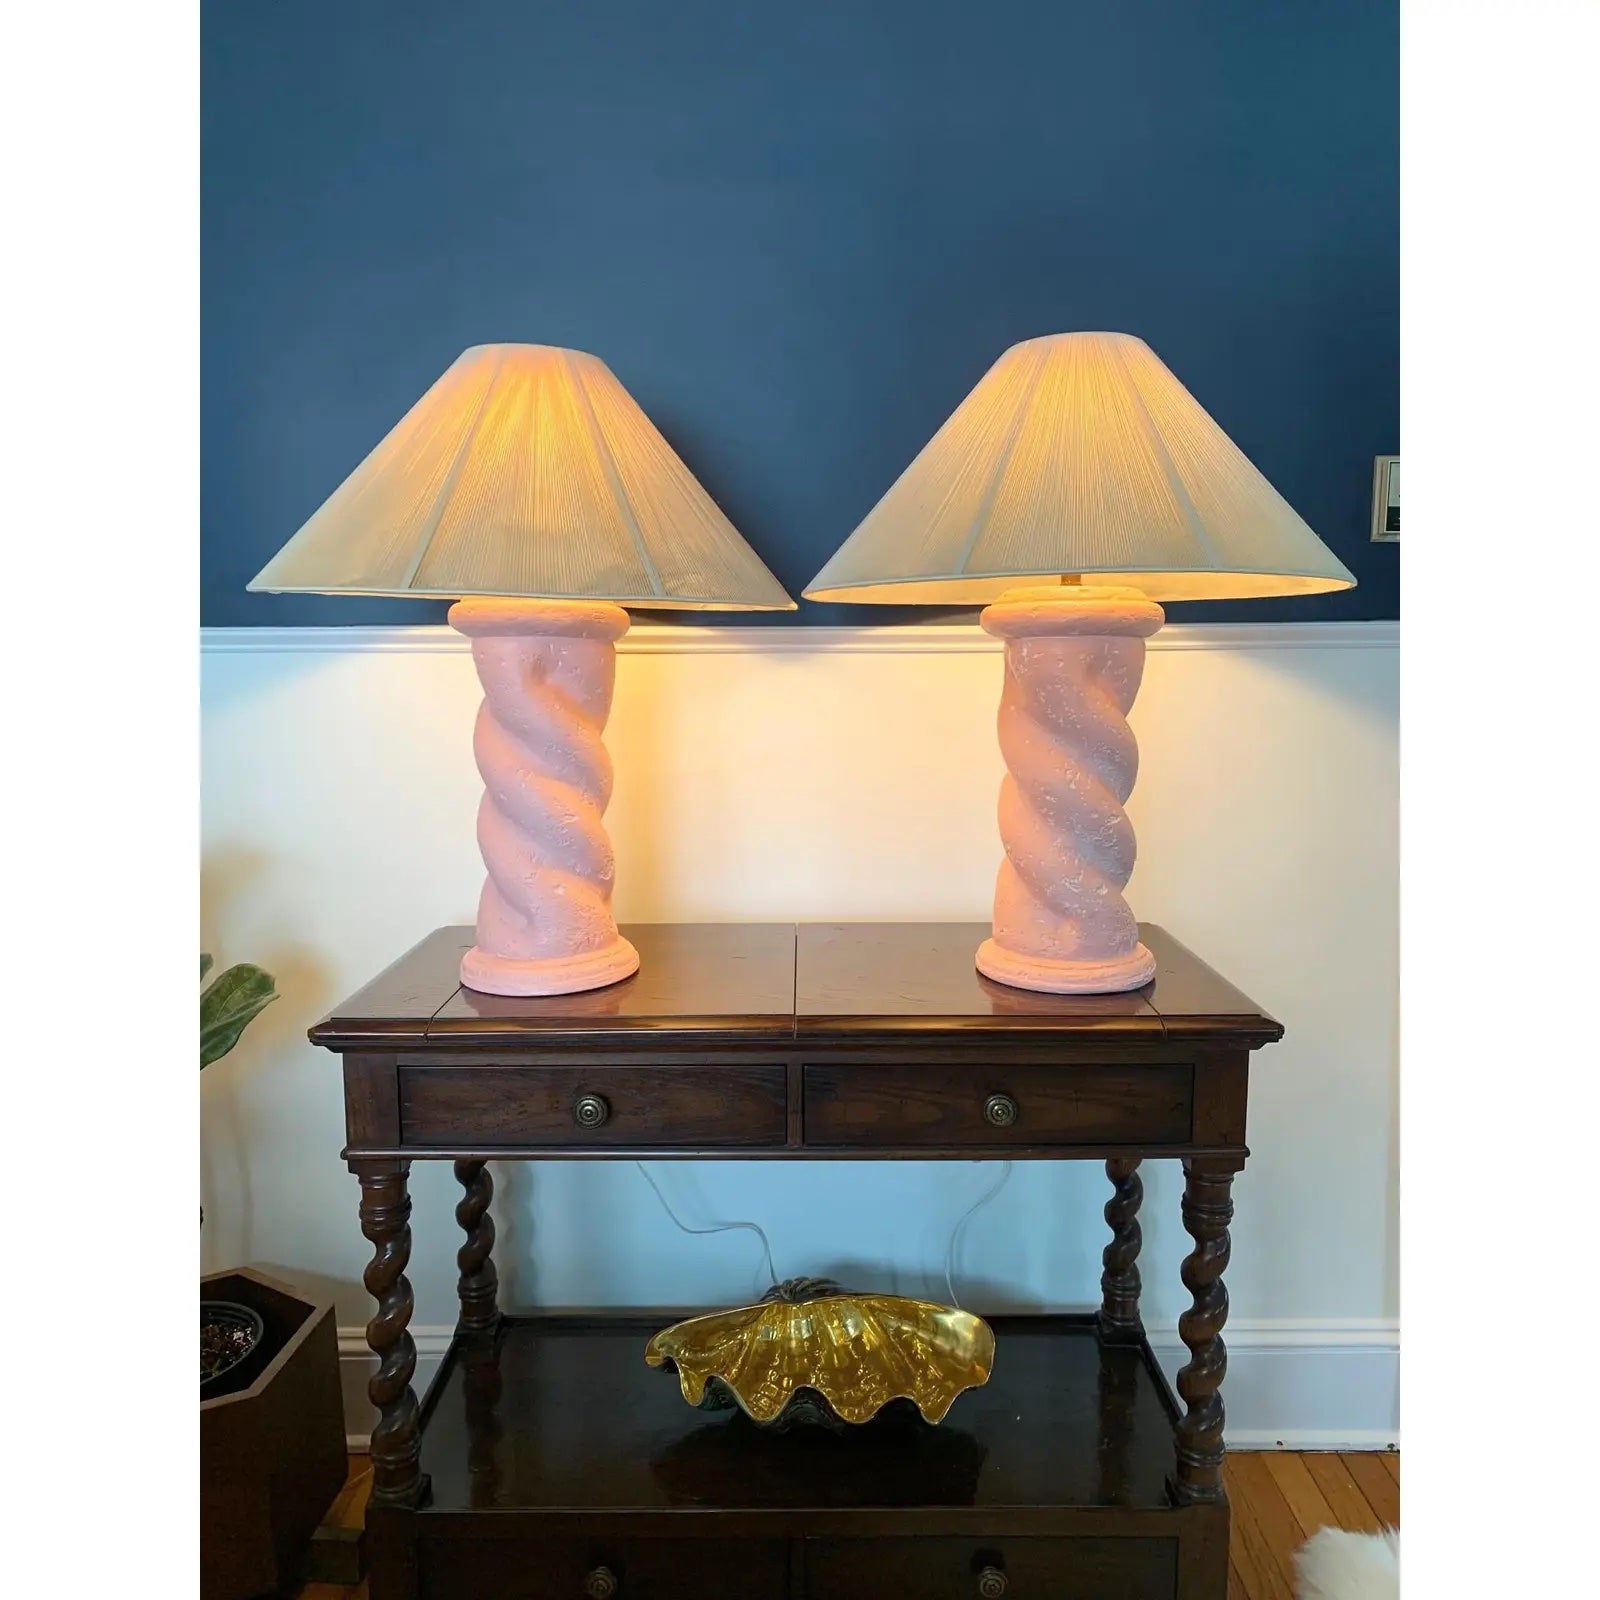 Beautiful Plaster Twist lamps in the manner of Michael Taylor. Unique pink finish! Awesome postmodern design and styling!

Shades and harps for staging purposes only.